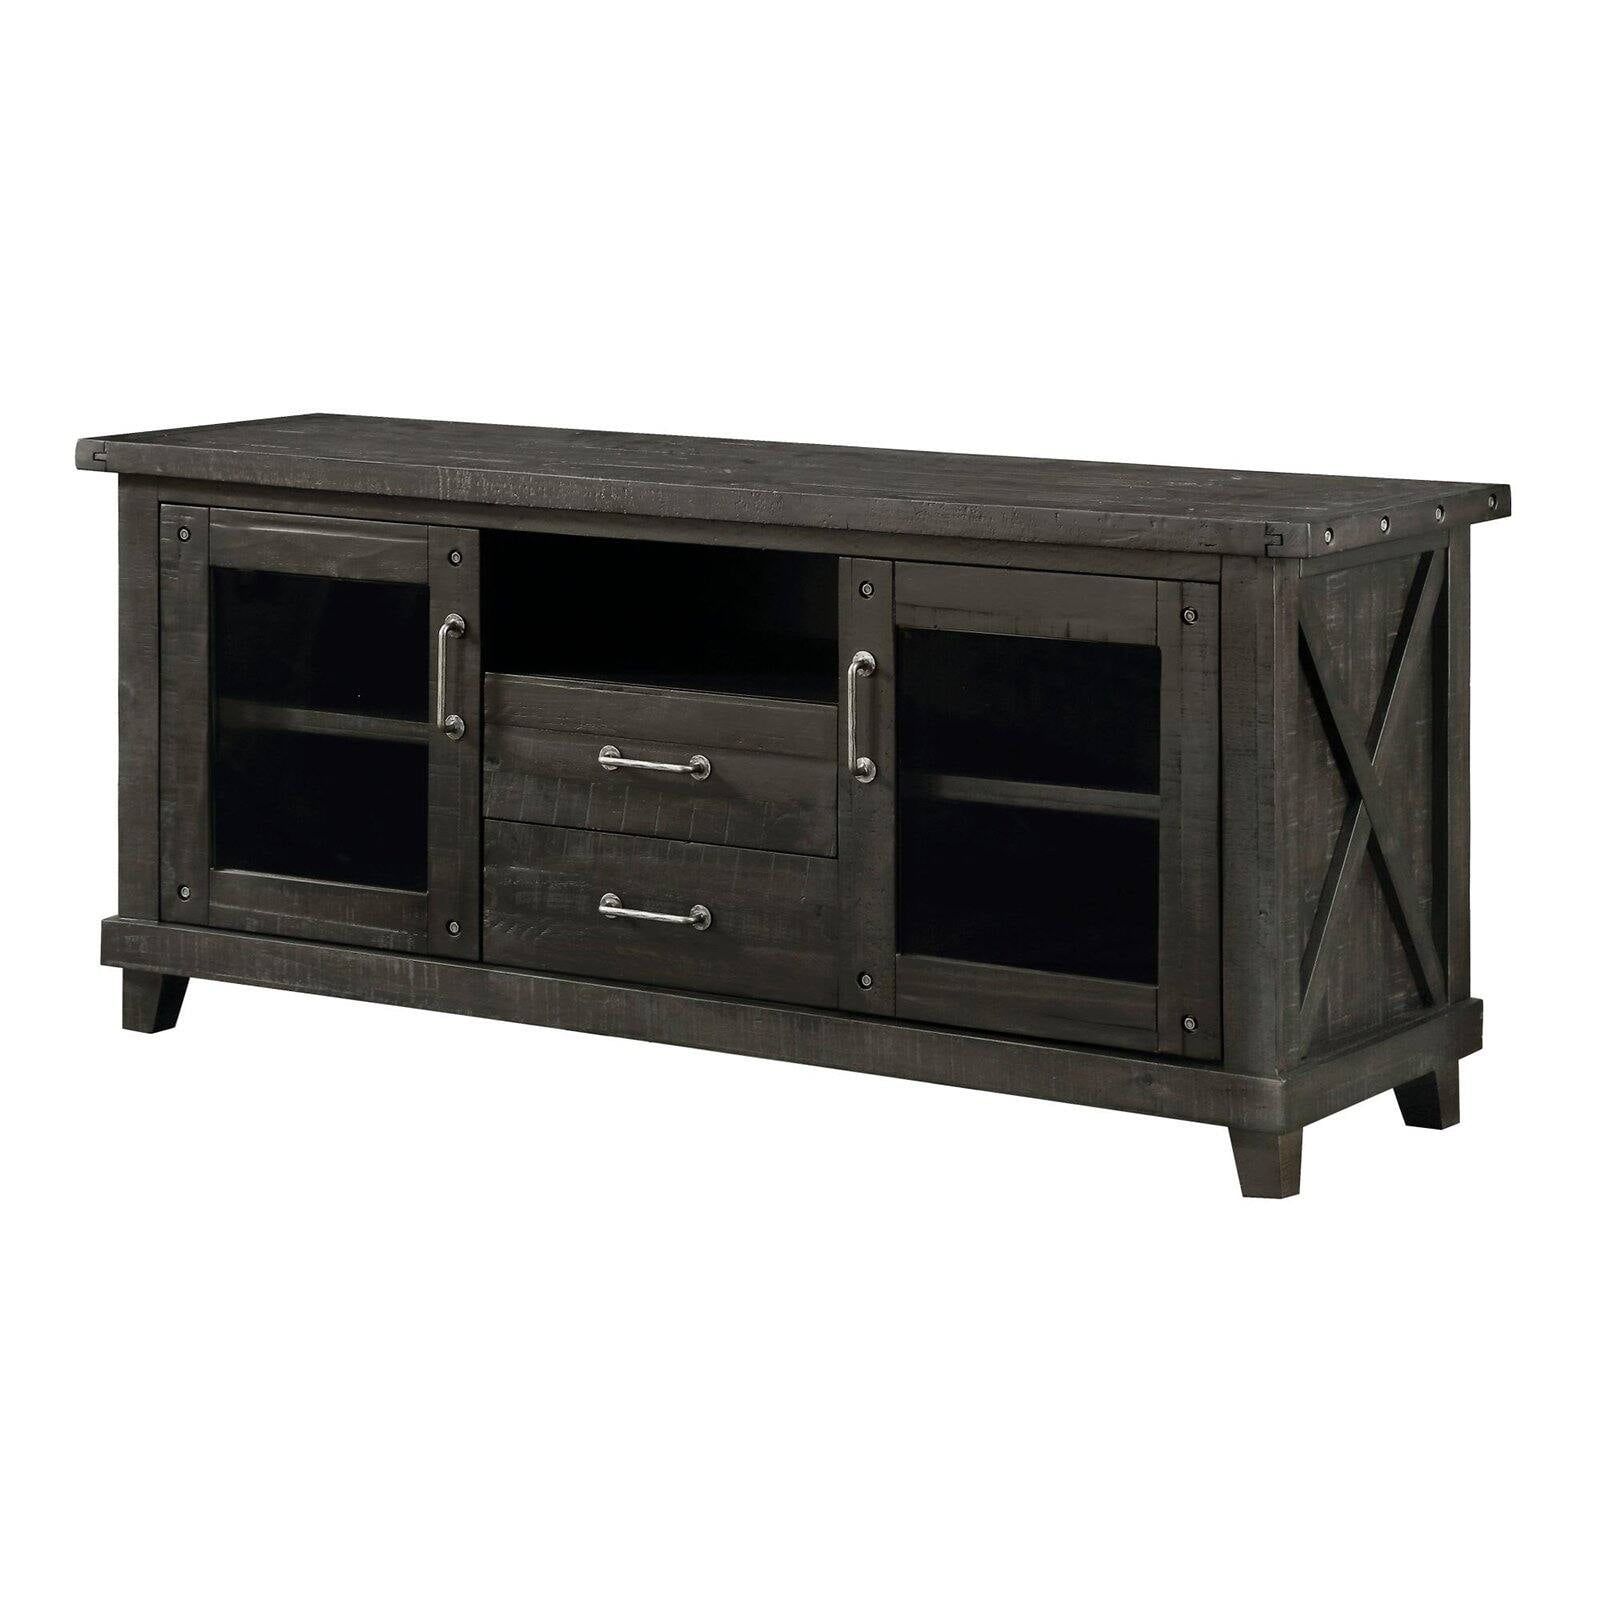 Modus Yosemite Media Console Tv Stand – Cafe – Walmart Inside Cafe Tv Stands With Storage (View 5 of 15)